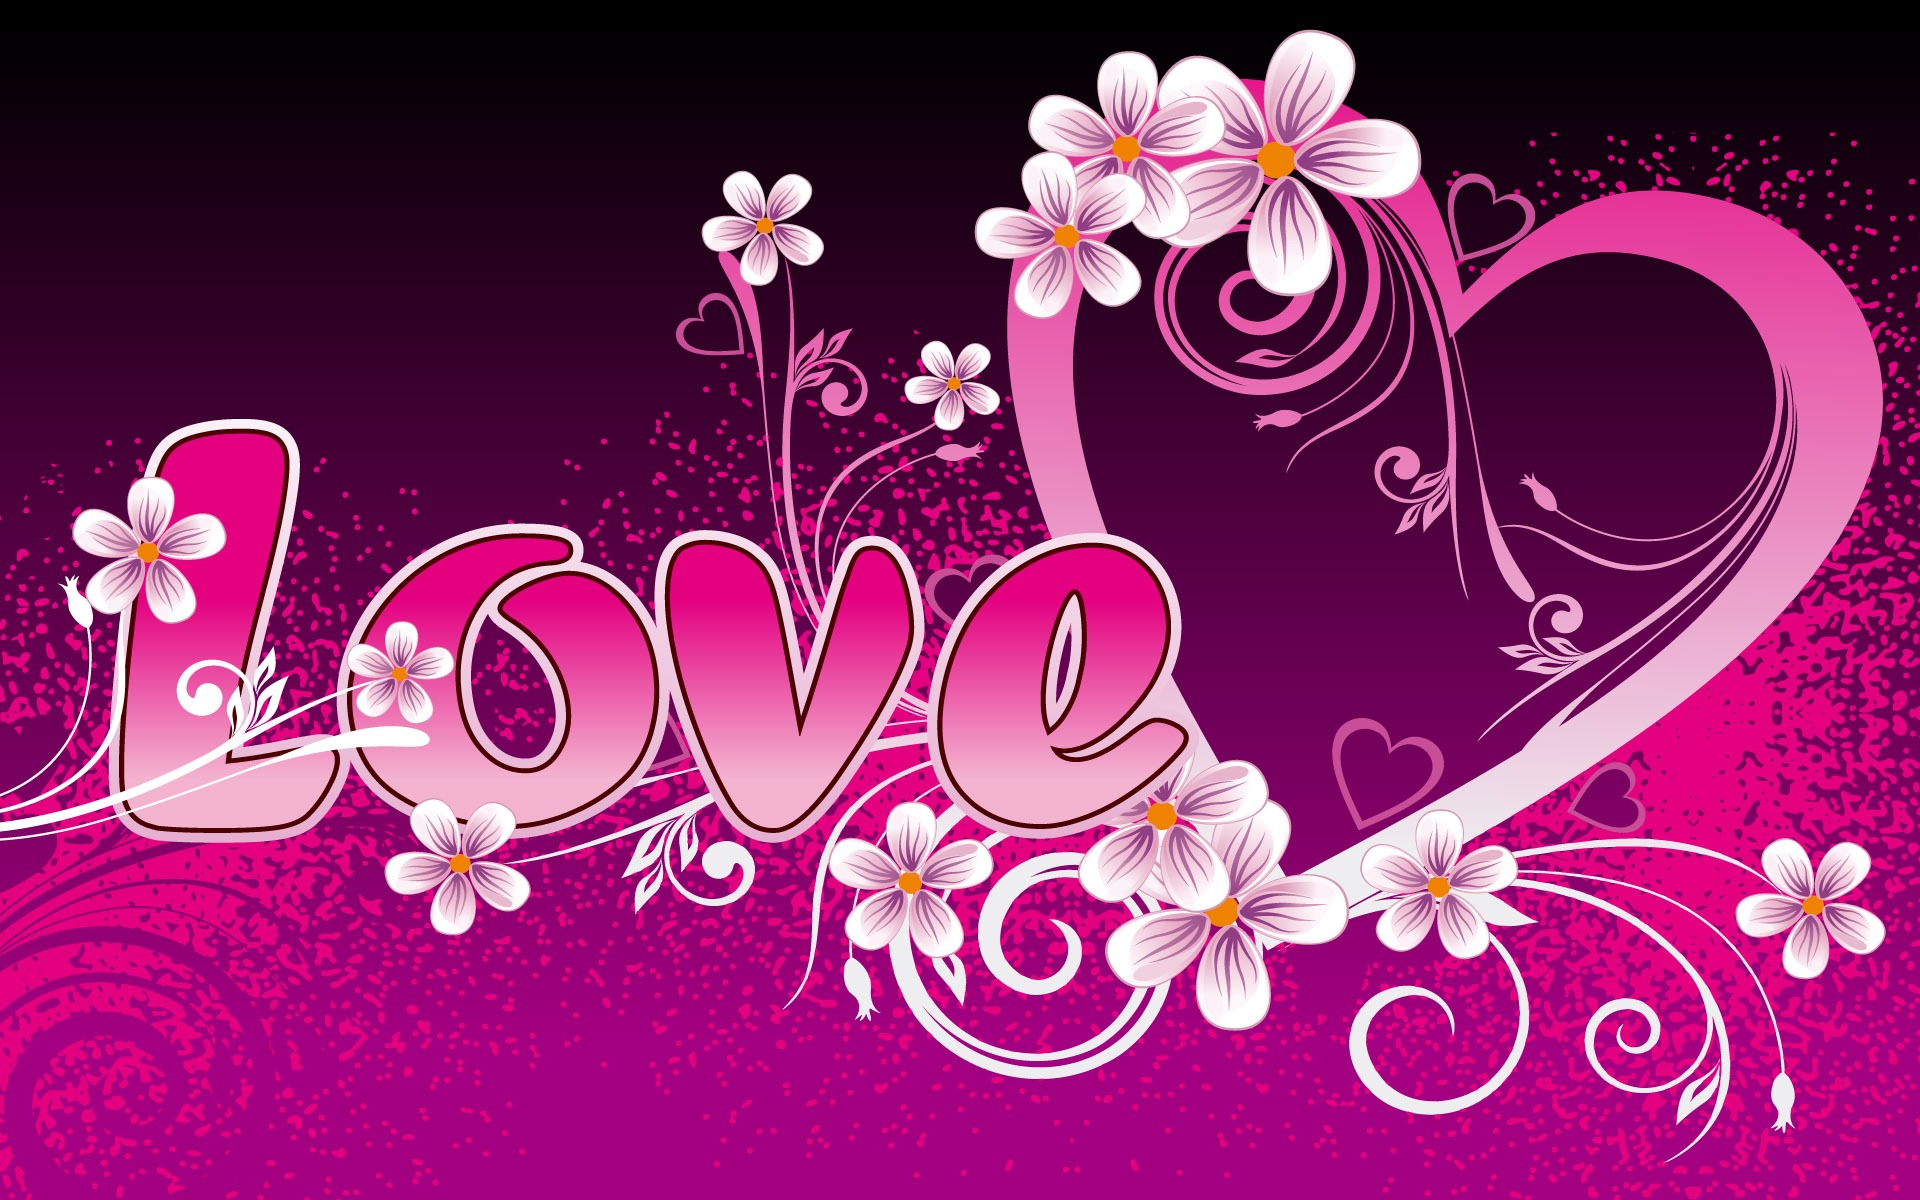 Valentine's Day Love Theme Wallpapers #1 - 1920x1200